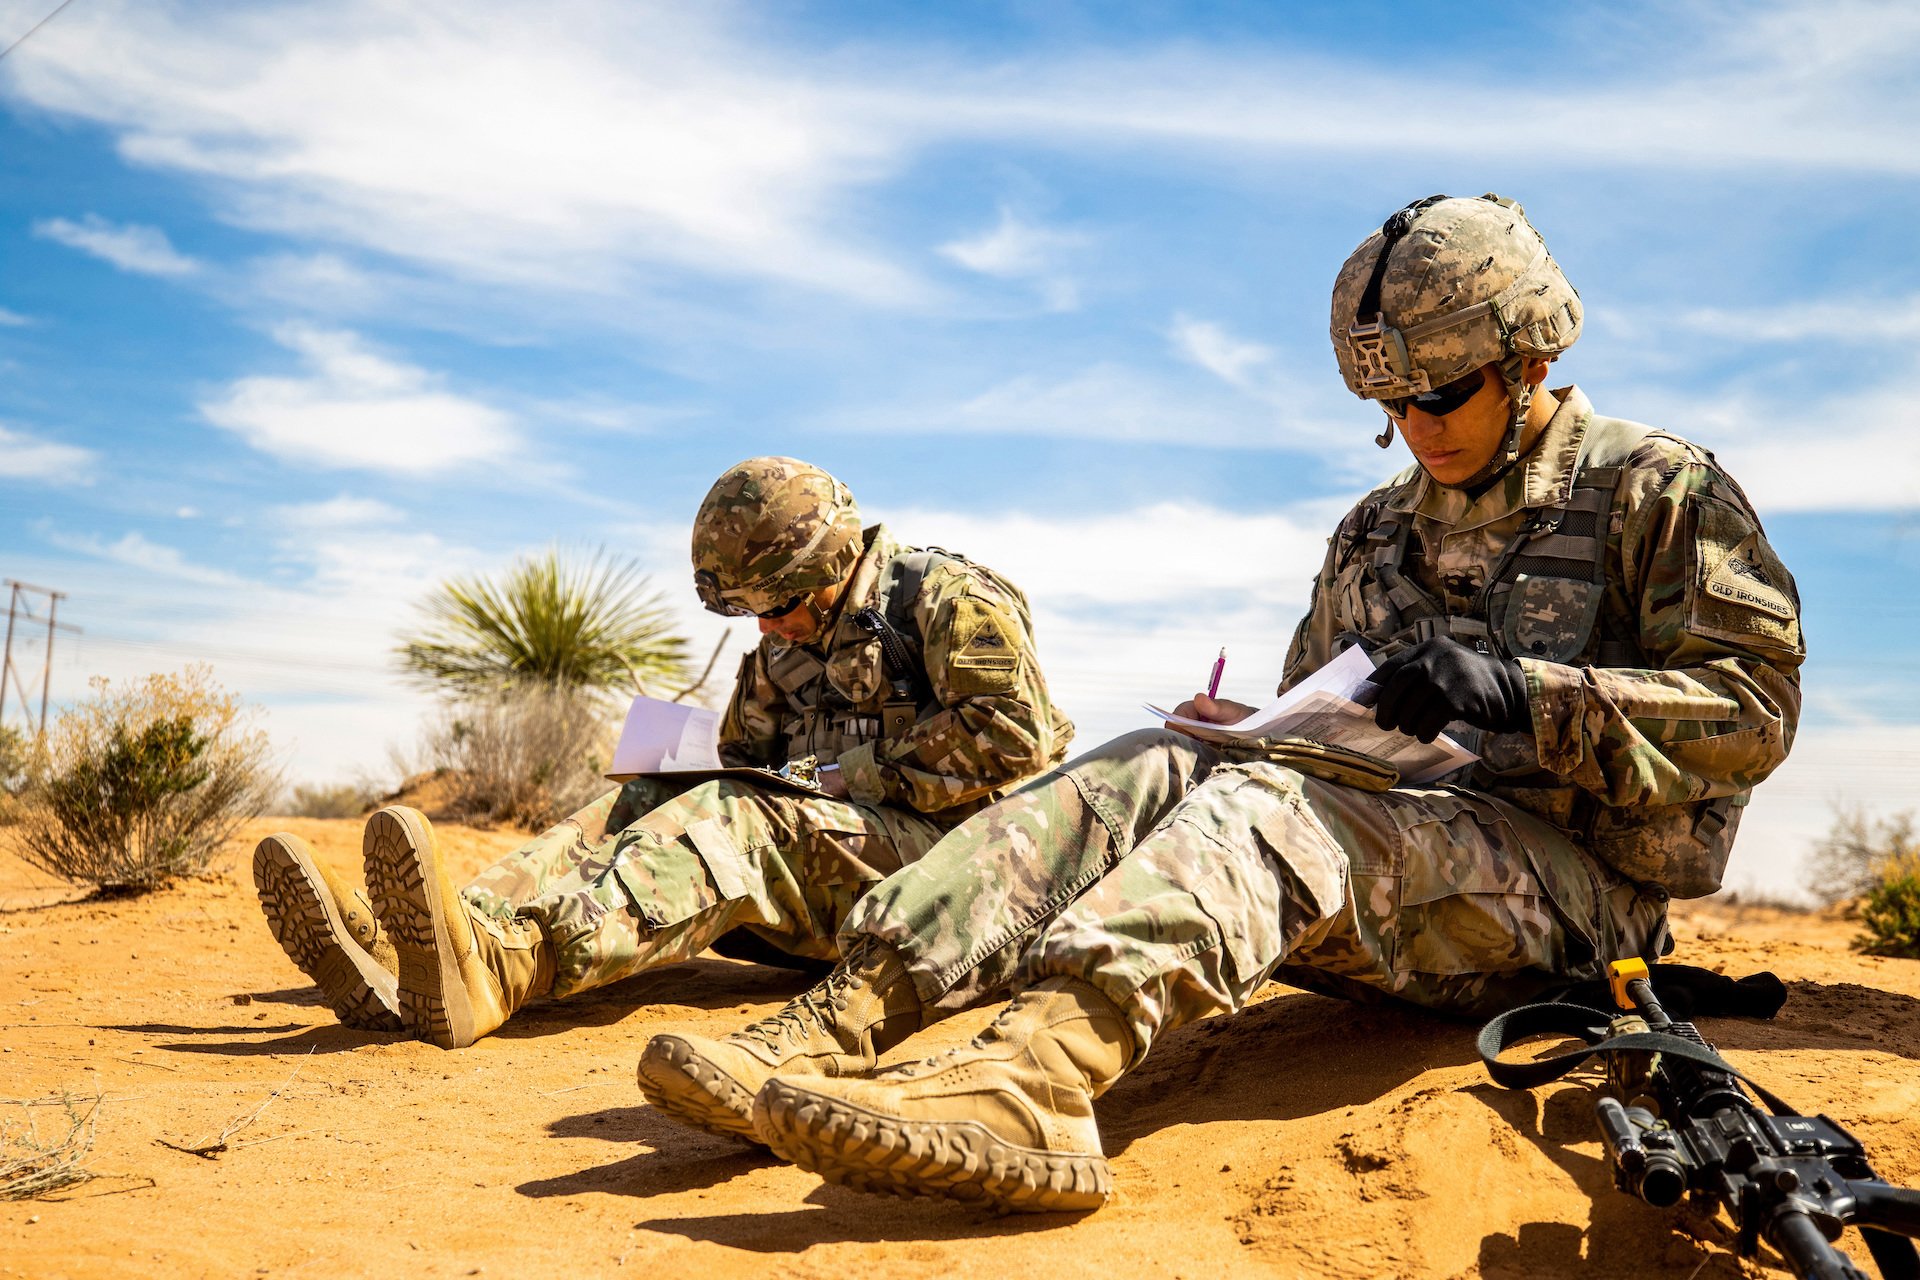 Spc. Salvador Osorio and Sgt. David Brewer, infantrymen with the 3rd Battalion, 41st Infantry Regiment, 1st Brigade Combat Team, 1st Infantry Division, plot location points during the land navigation portion of the Expert Infantryman Badge testing at Fort Bliss, Texas, March 4, 2019. US Army photo by Spc. Matthew J. Marcellus.